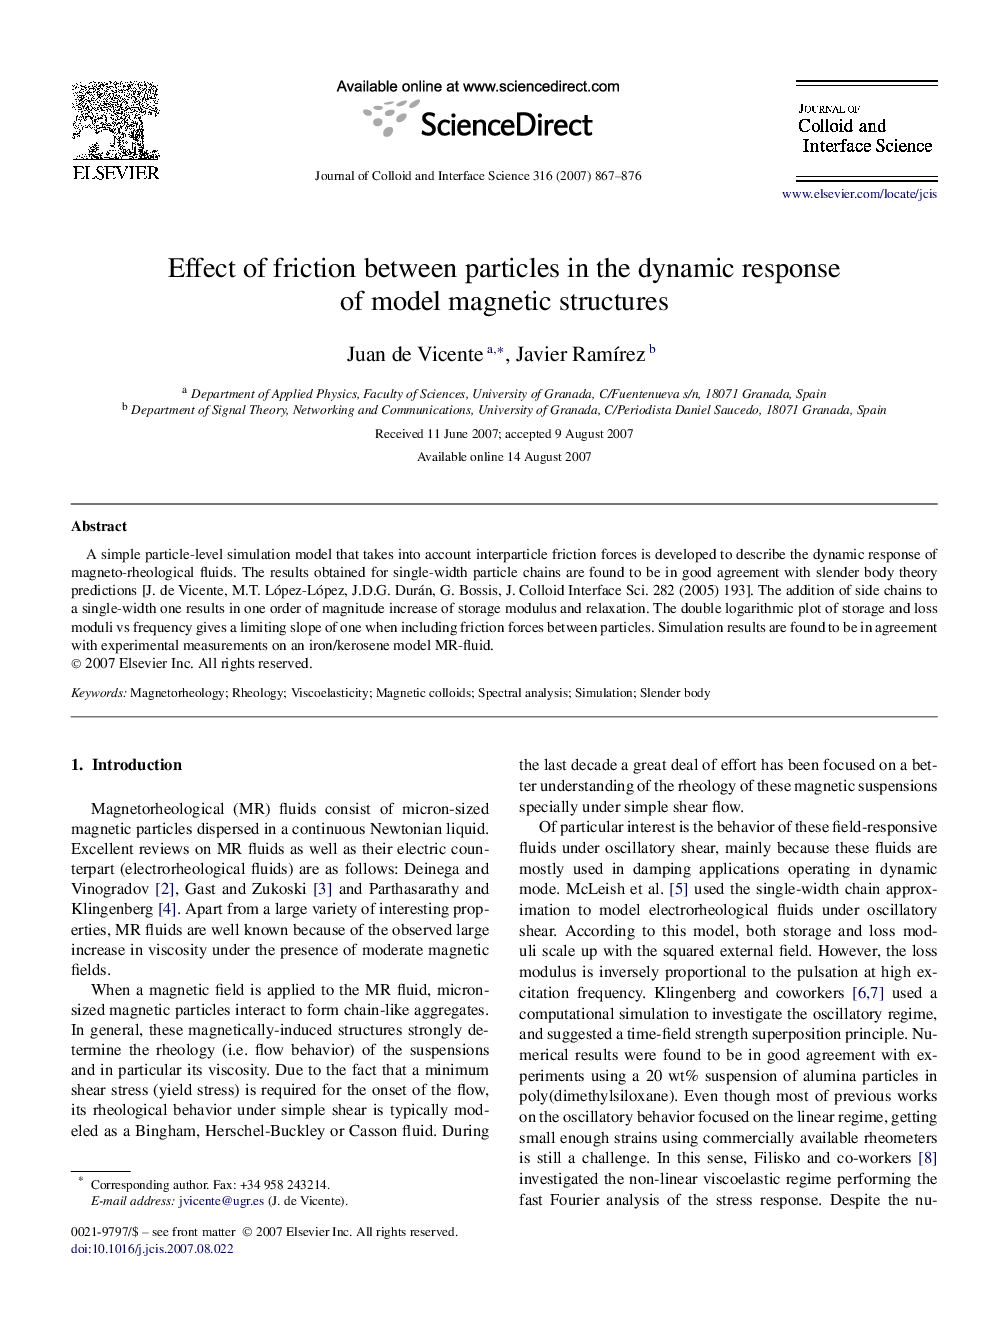 Effect of friction between particles in the dynamic response of model magnetic structures